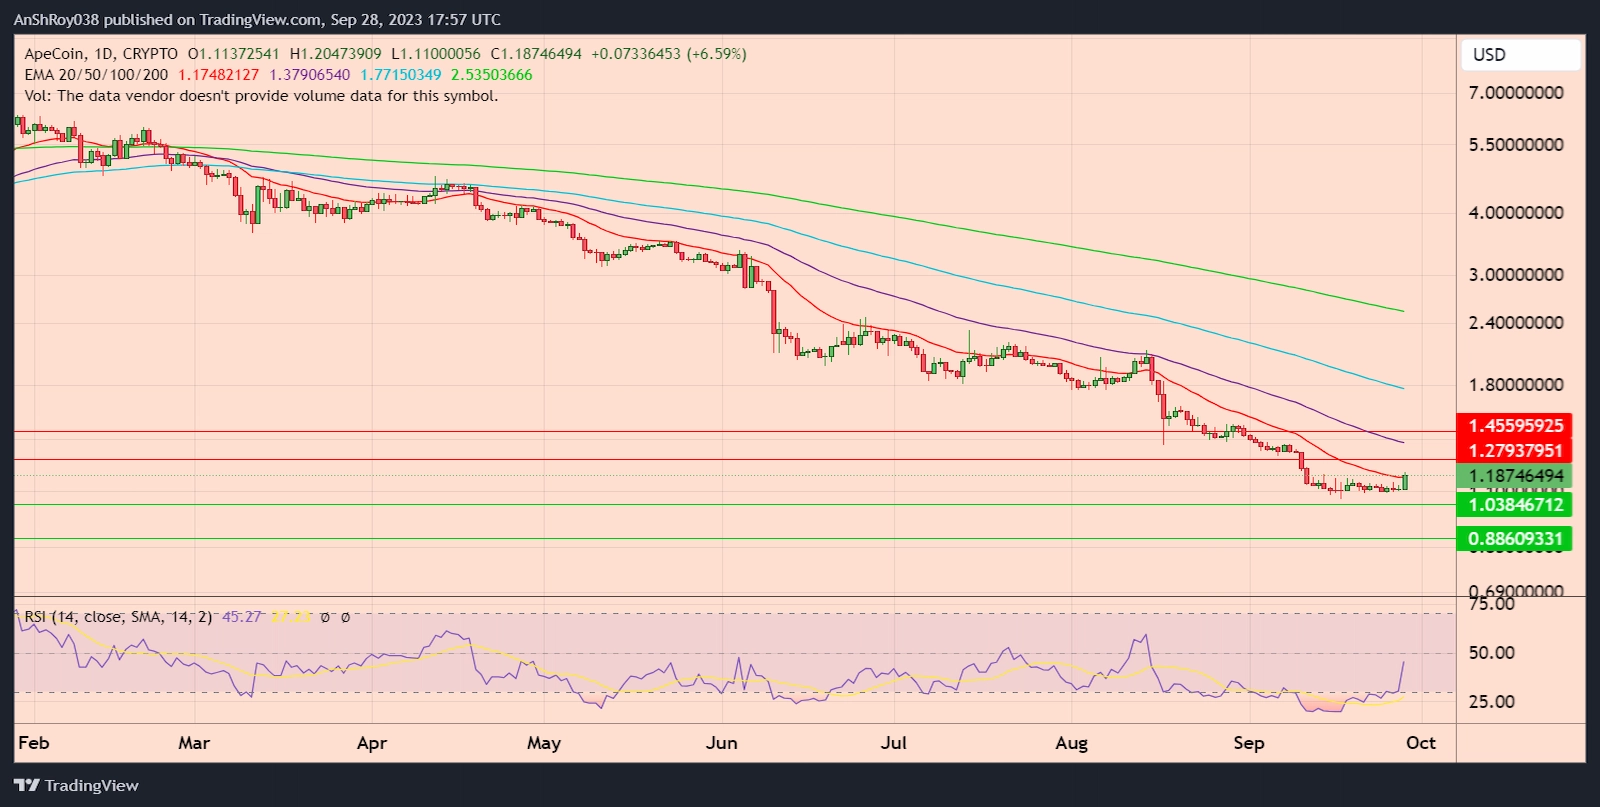 APEUSD daily price chart with RSI.